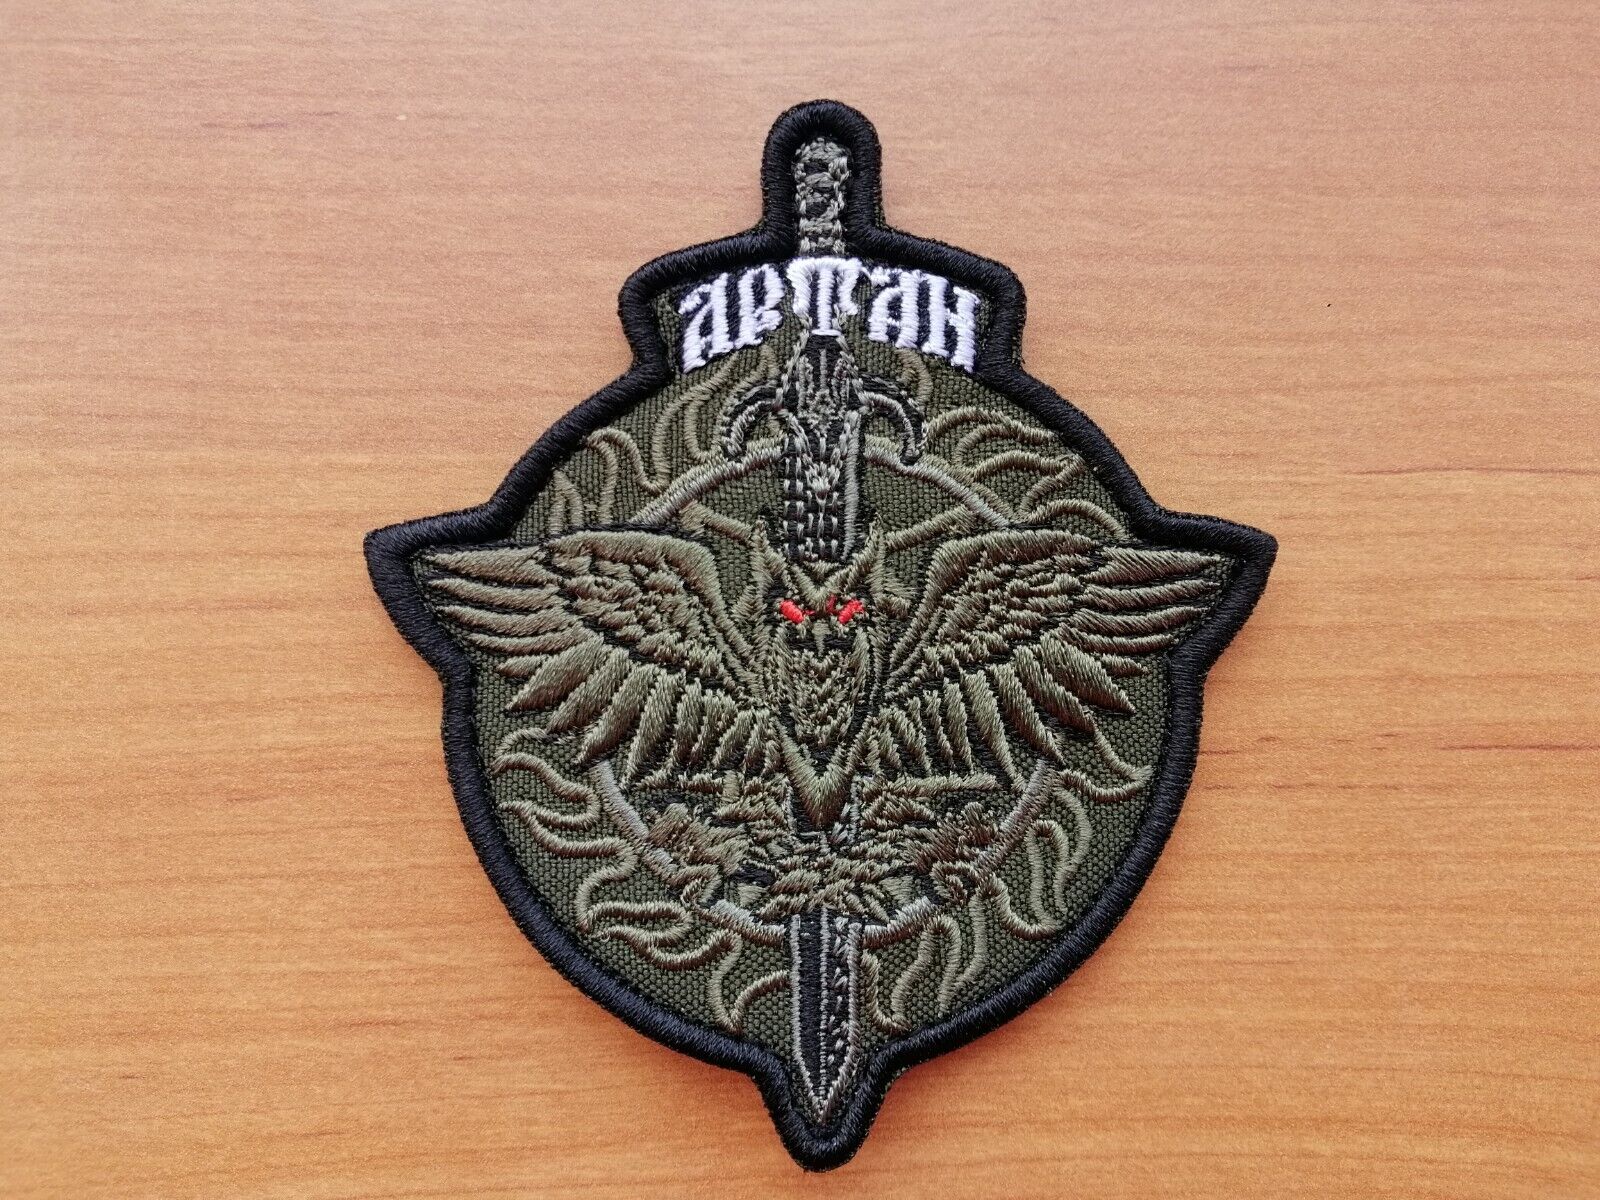 ARTAN embroidered patch UKRAINE TACTICAL PATCH